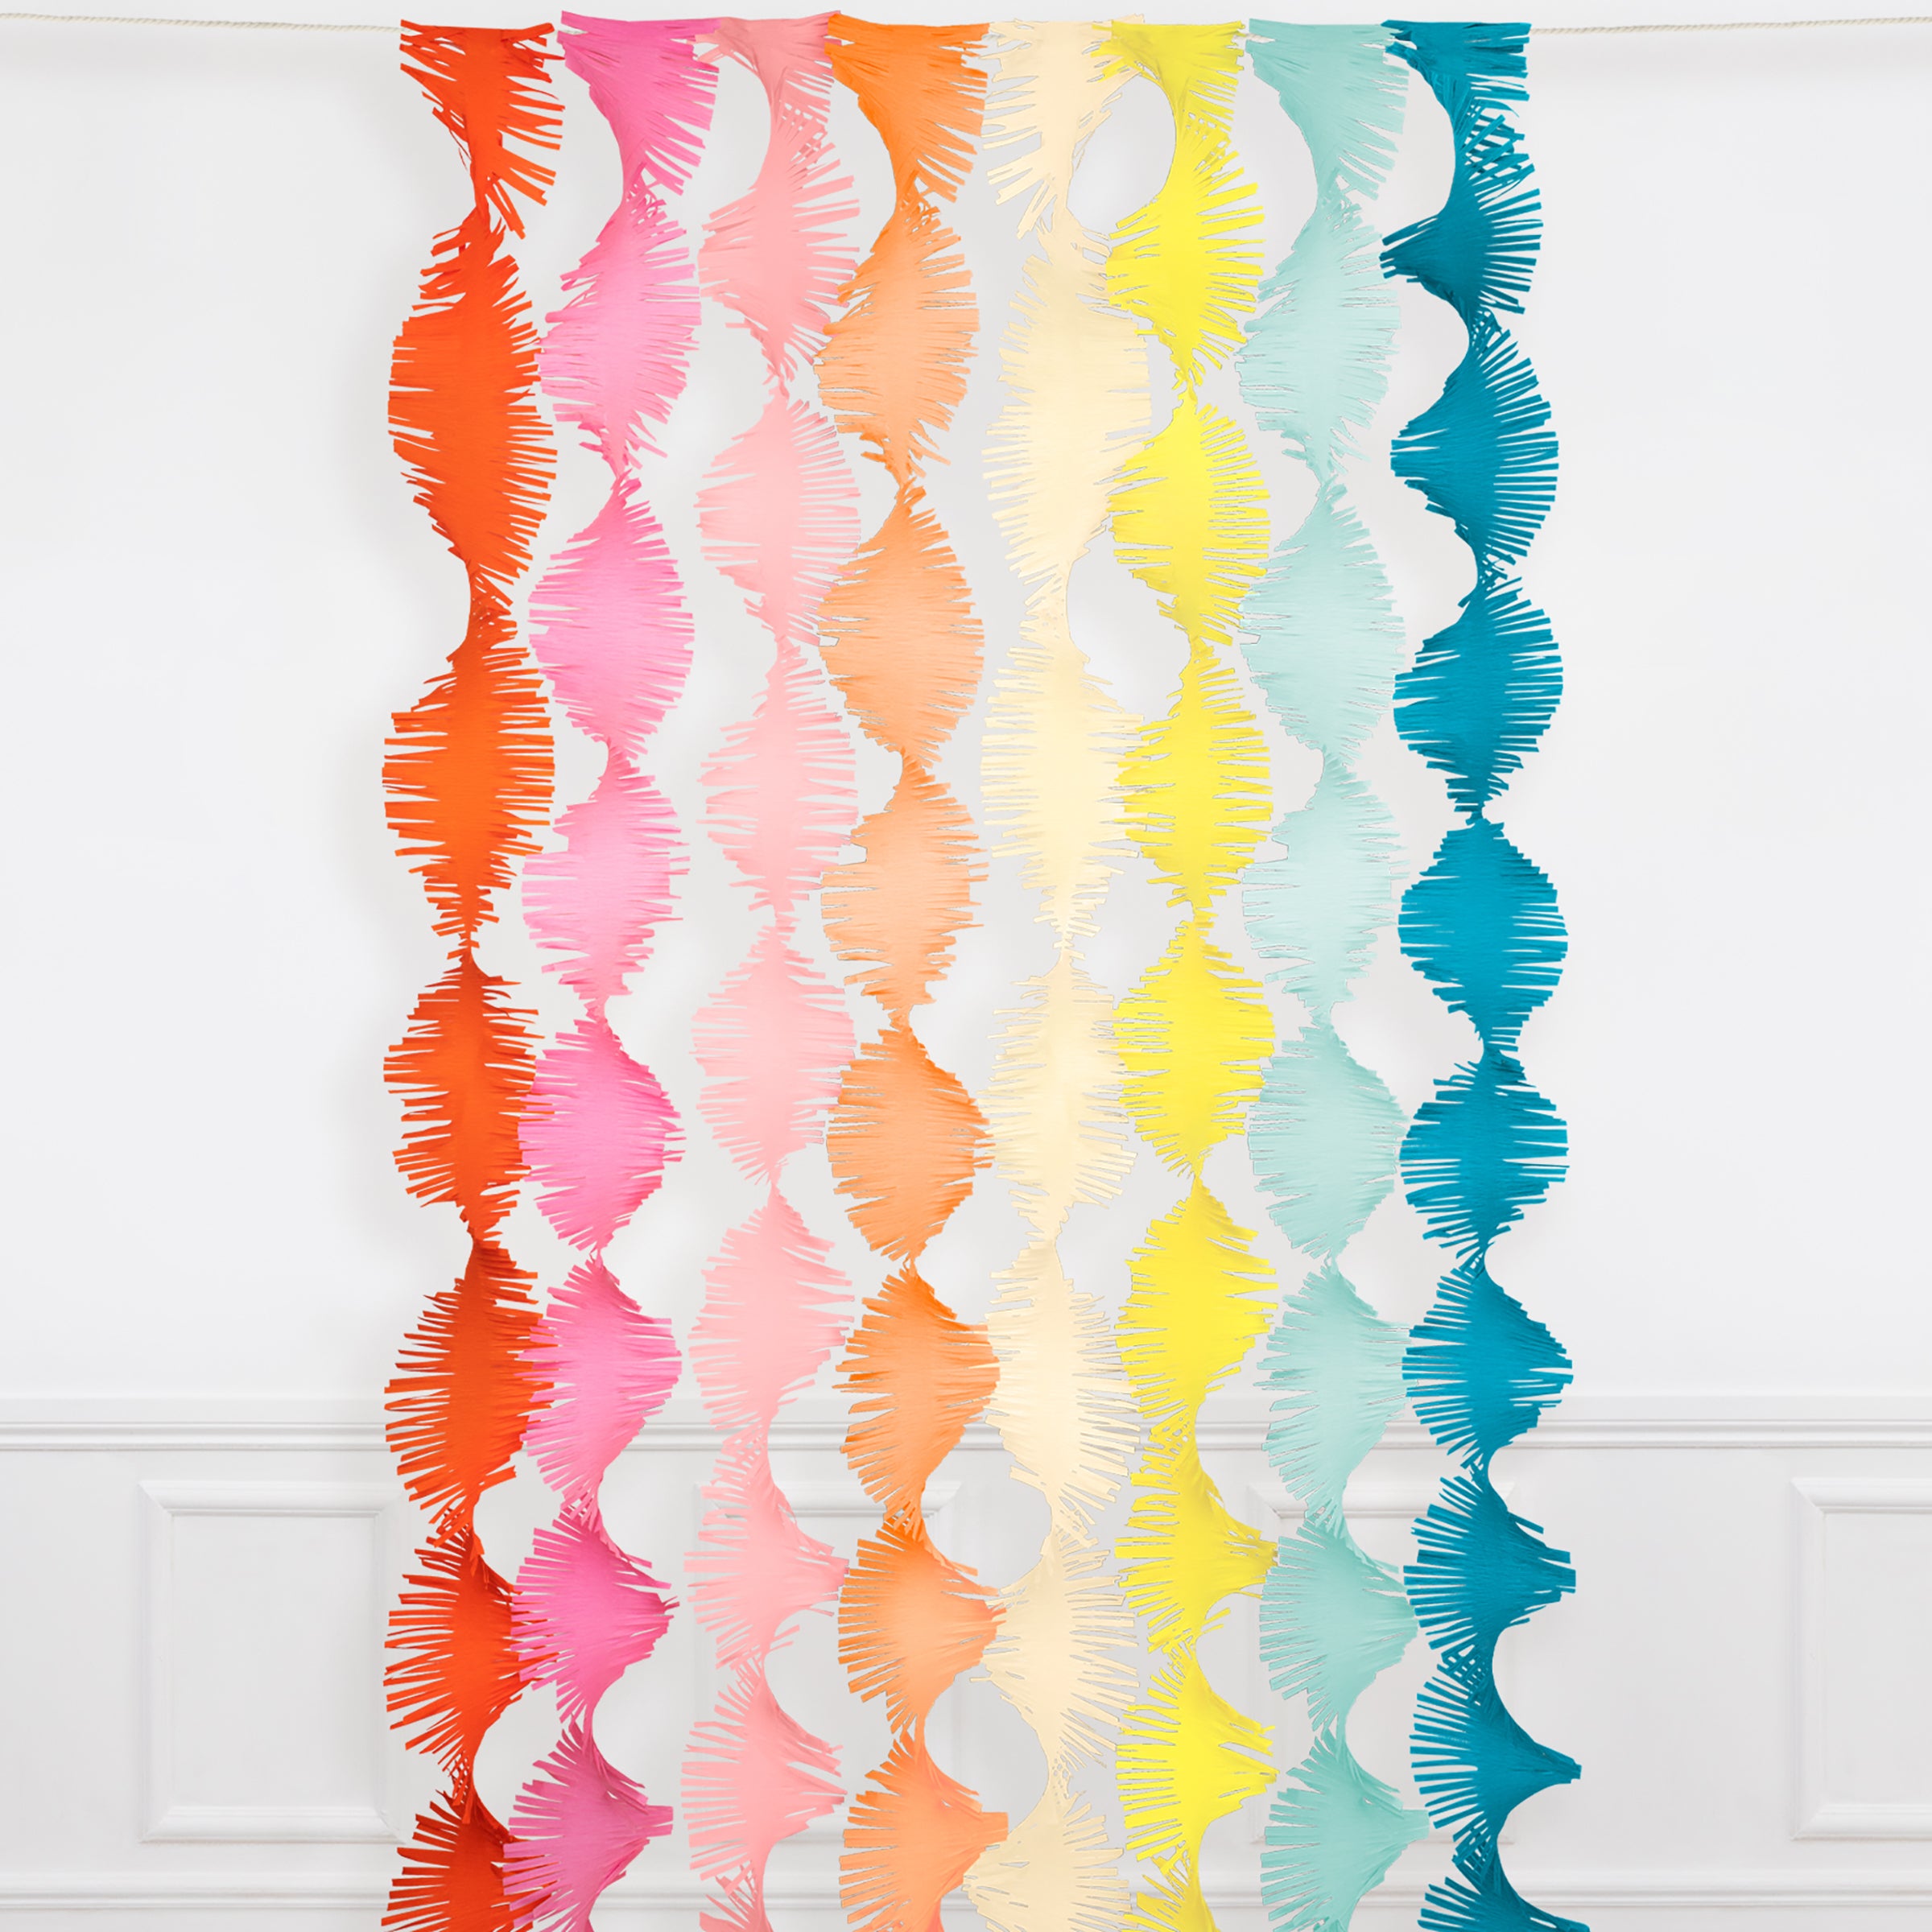 Our party backdrop is crafted from paper streamers in 8 colours.